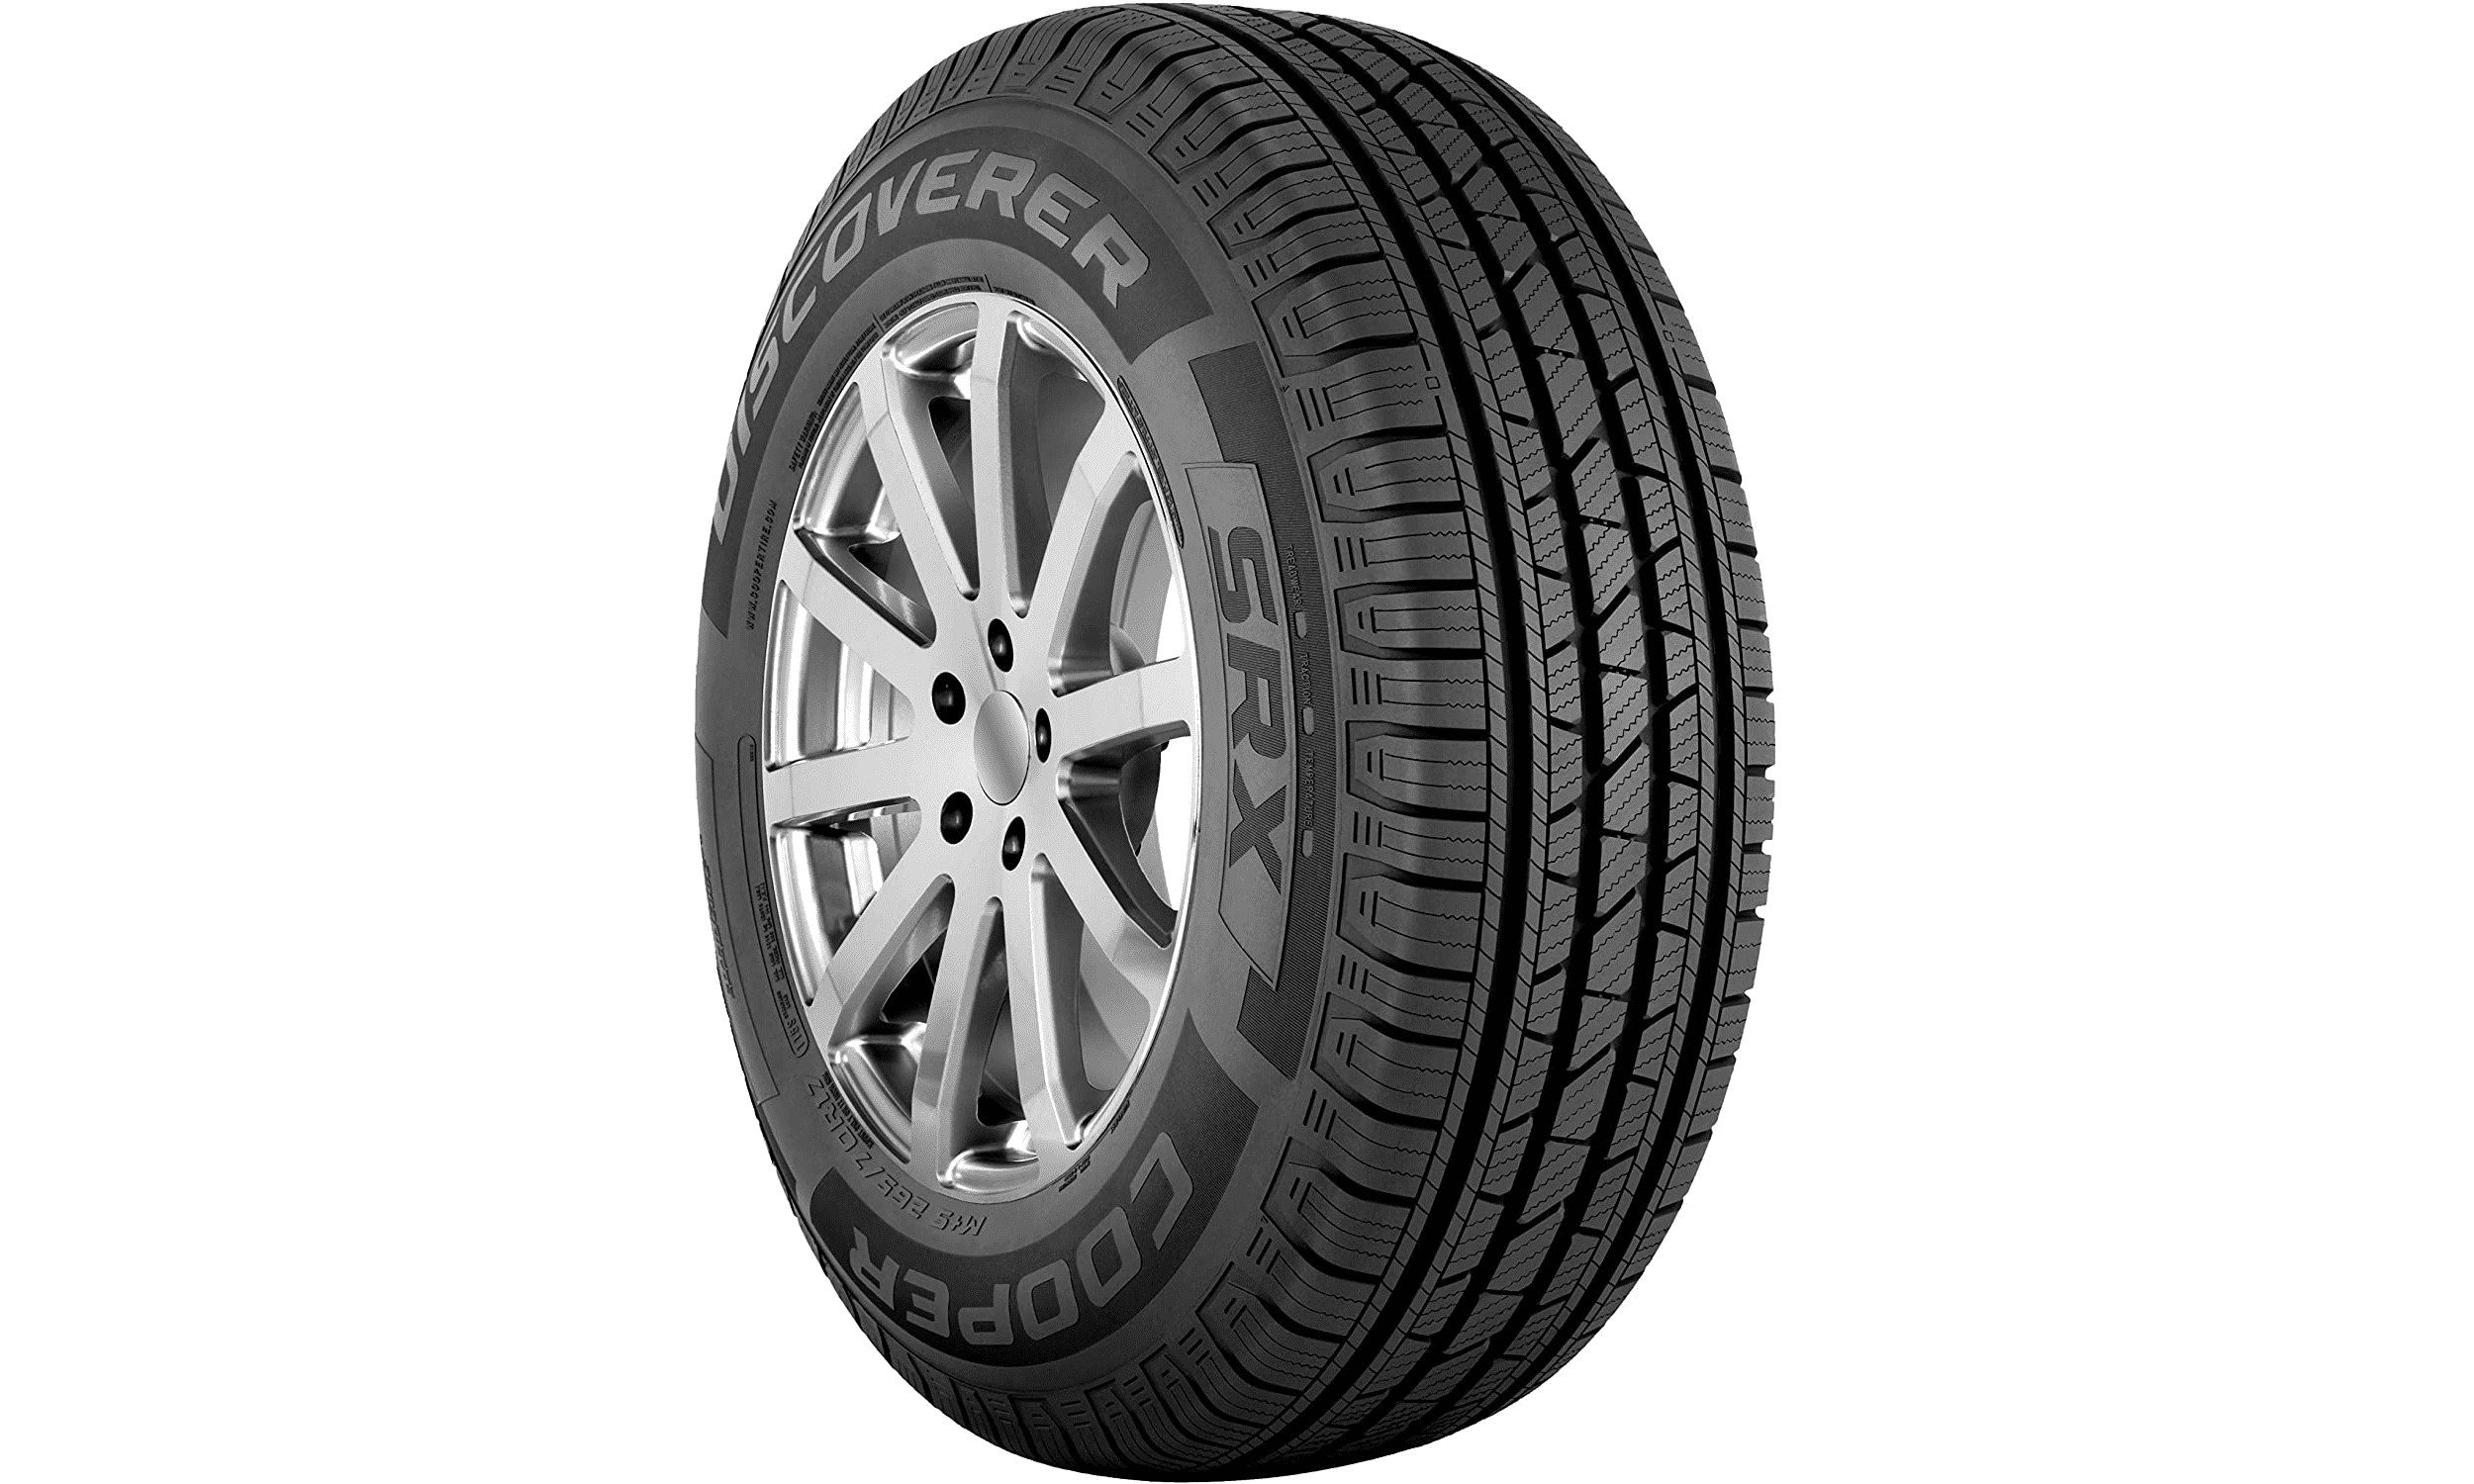 Cooper Discoverer SRX Tire Review Tire Space Tires Reviews All Brands